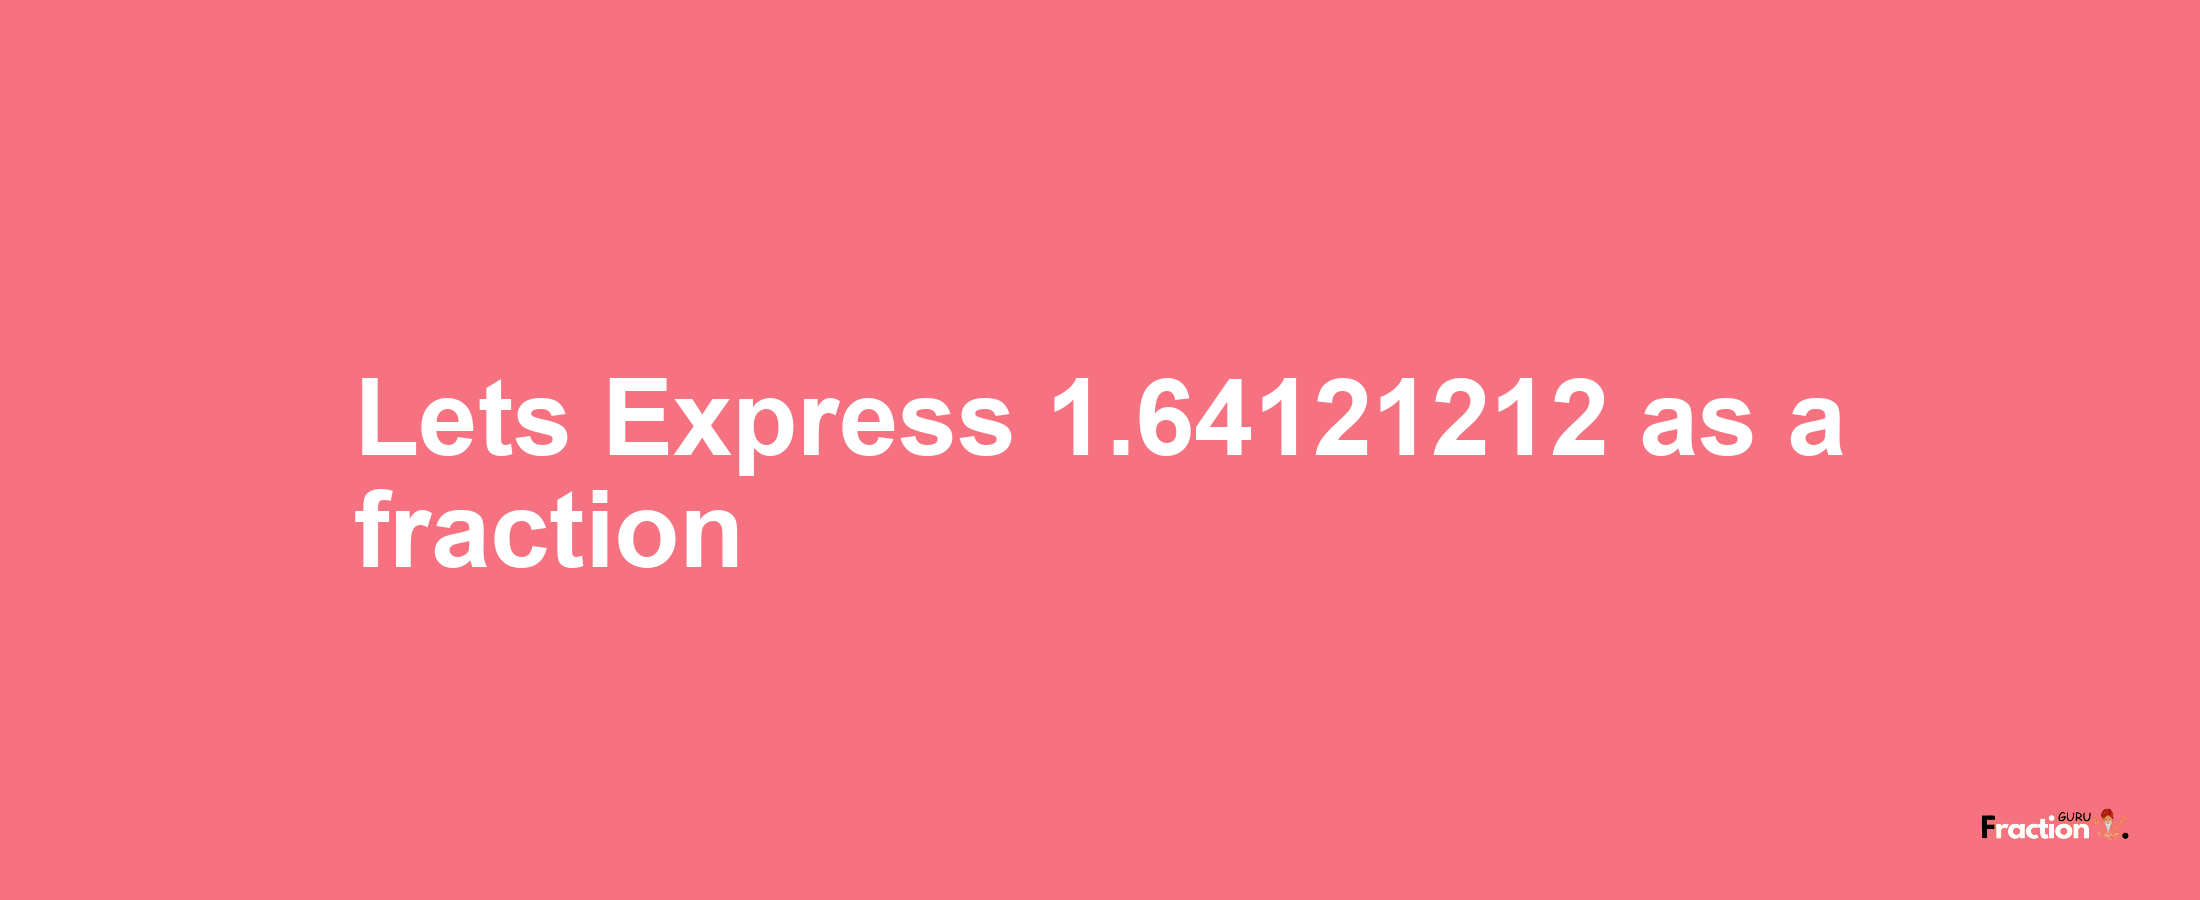 Lets Express 1.64121212 as afraction